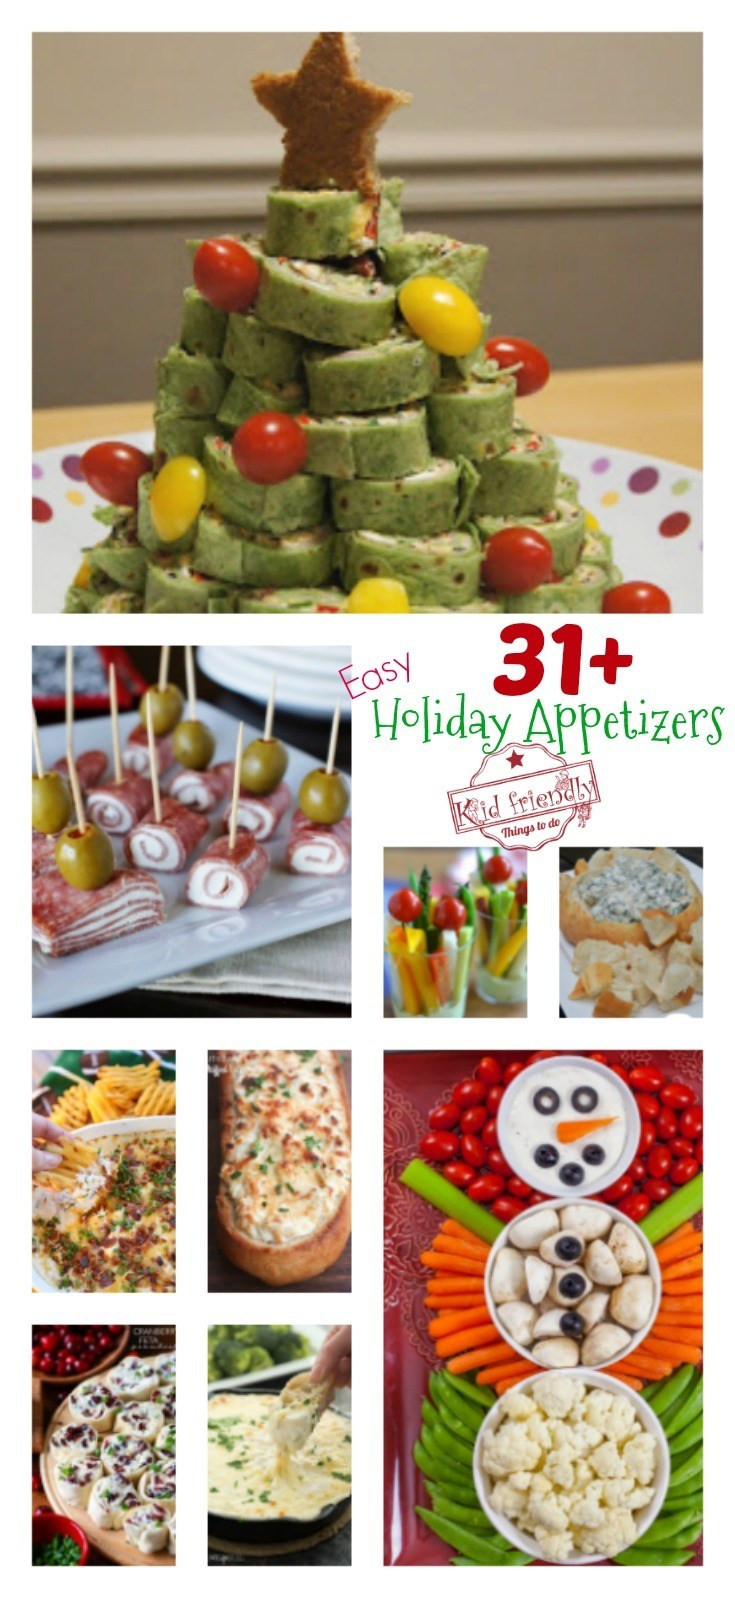 Easy Christmas Appetizers For A Crowd
 Over 31 Easy Holiday Appetizers to Make for Christmas New